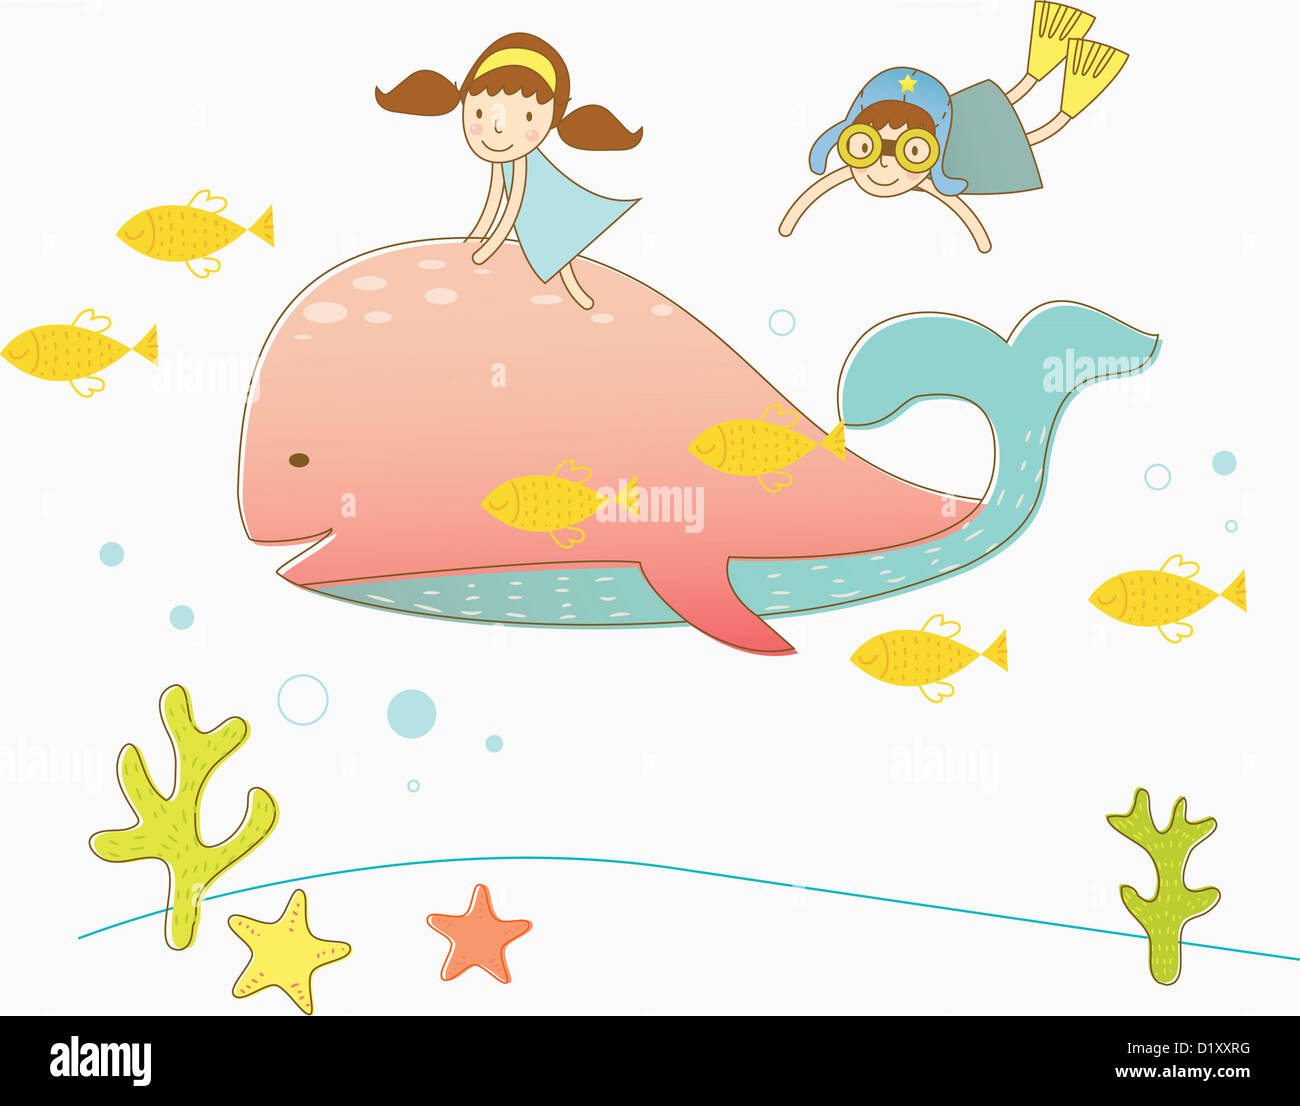 illustration of human cartoon characters under the sea with a whale Stock  Photo - Alamy